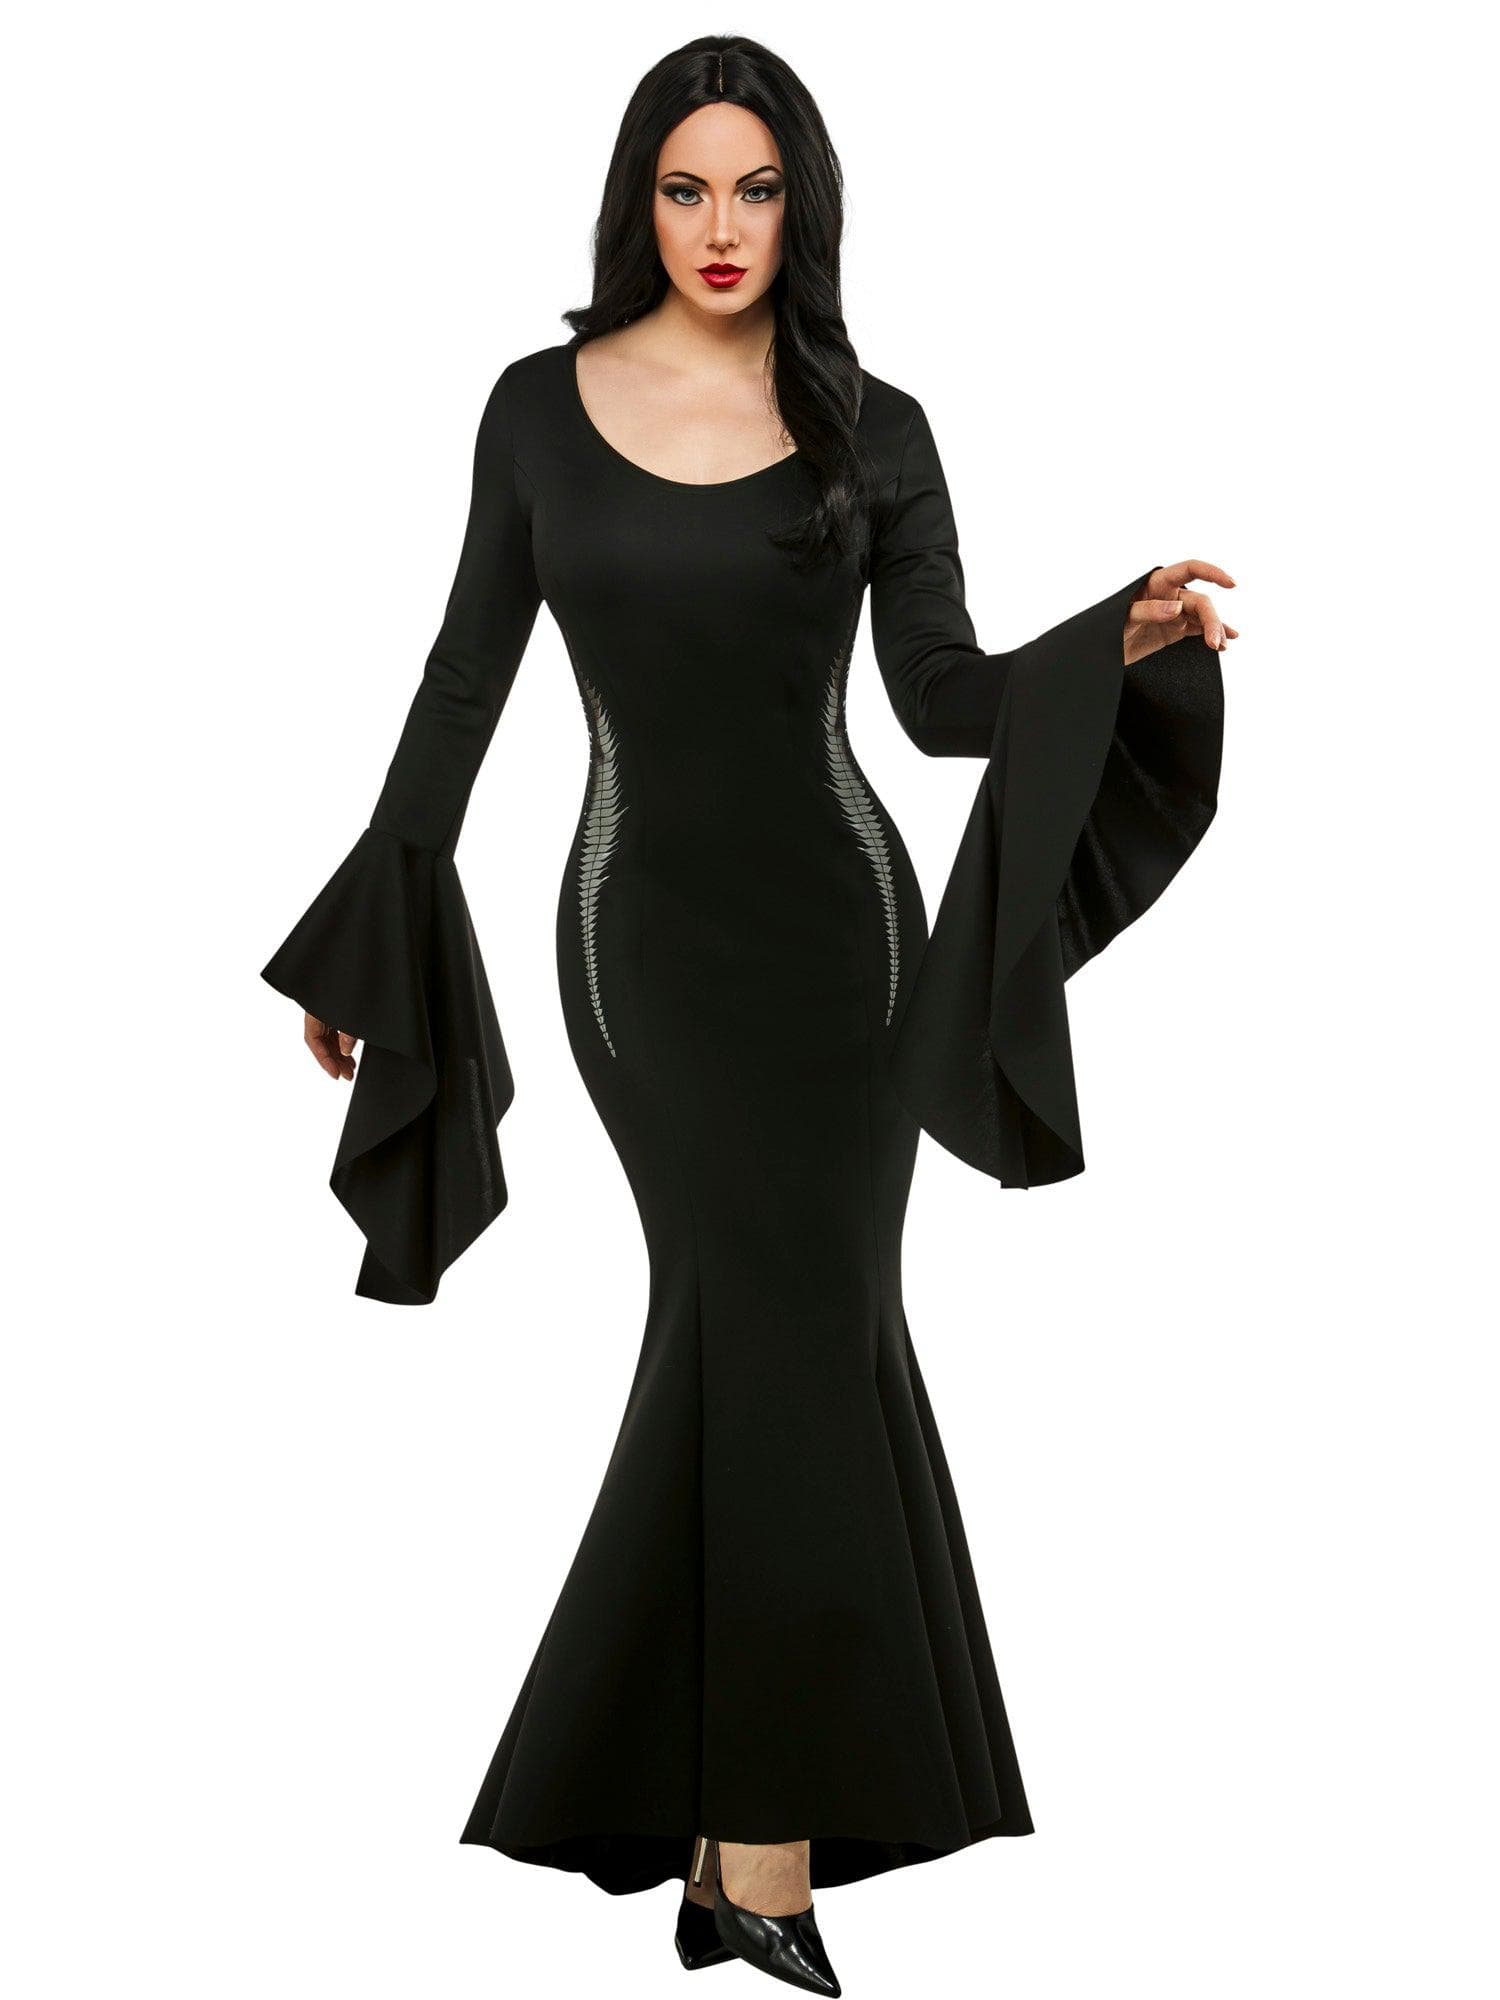 Wednesday Nevermore Academy Morticia Addams Adult Costume